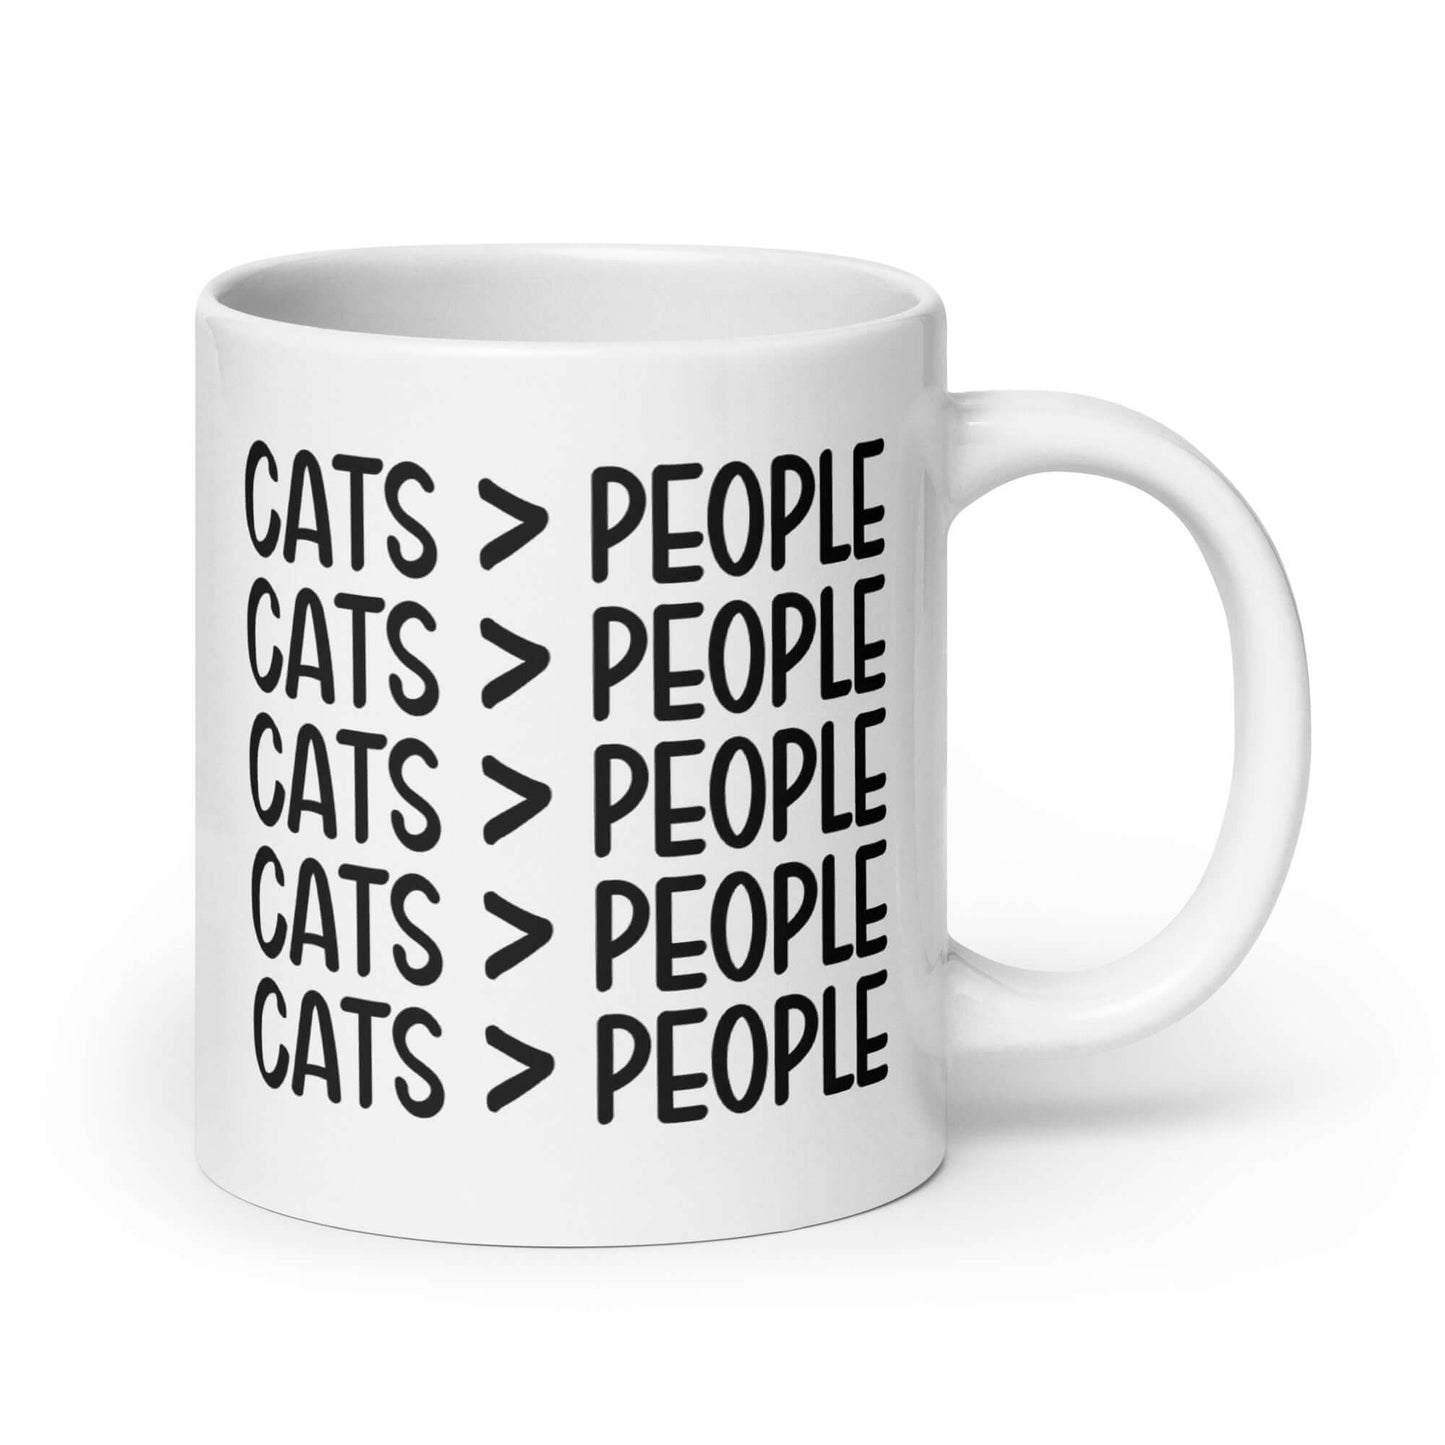 Cats are greater than people mug